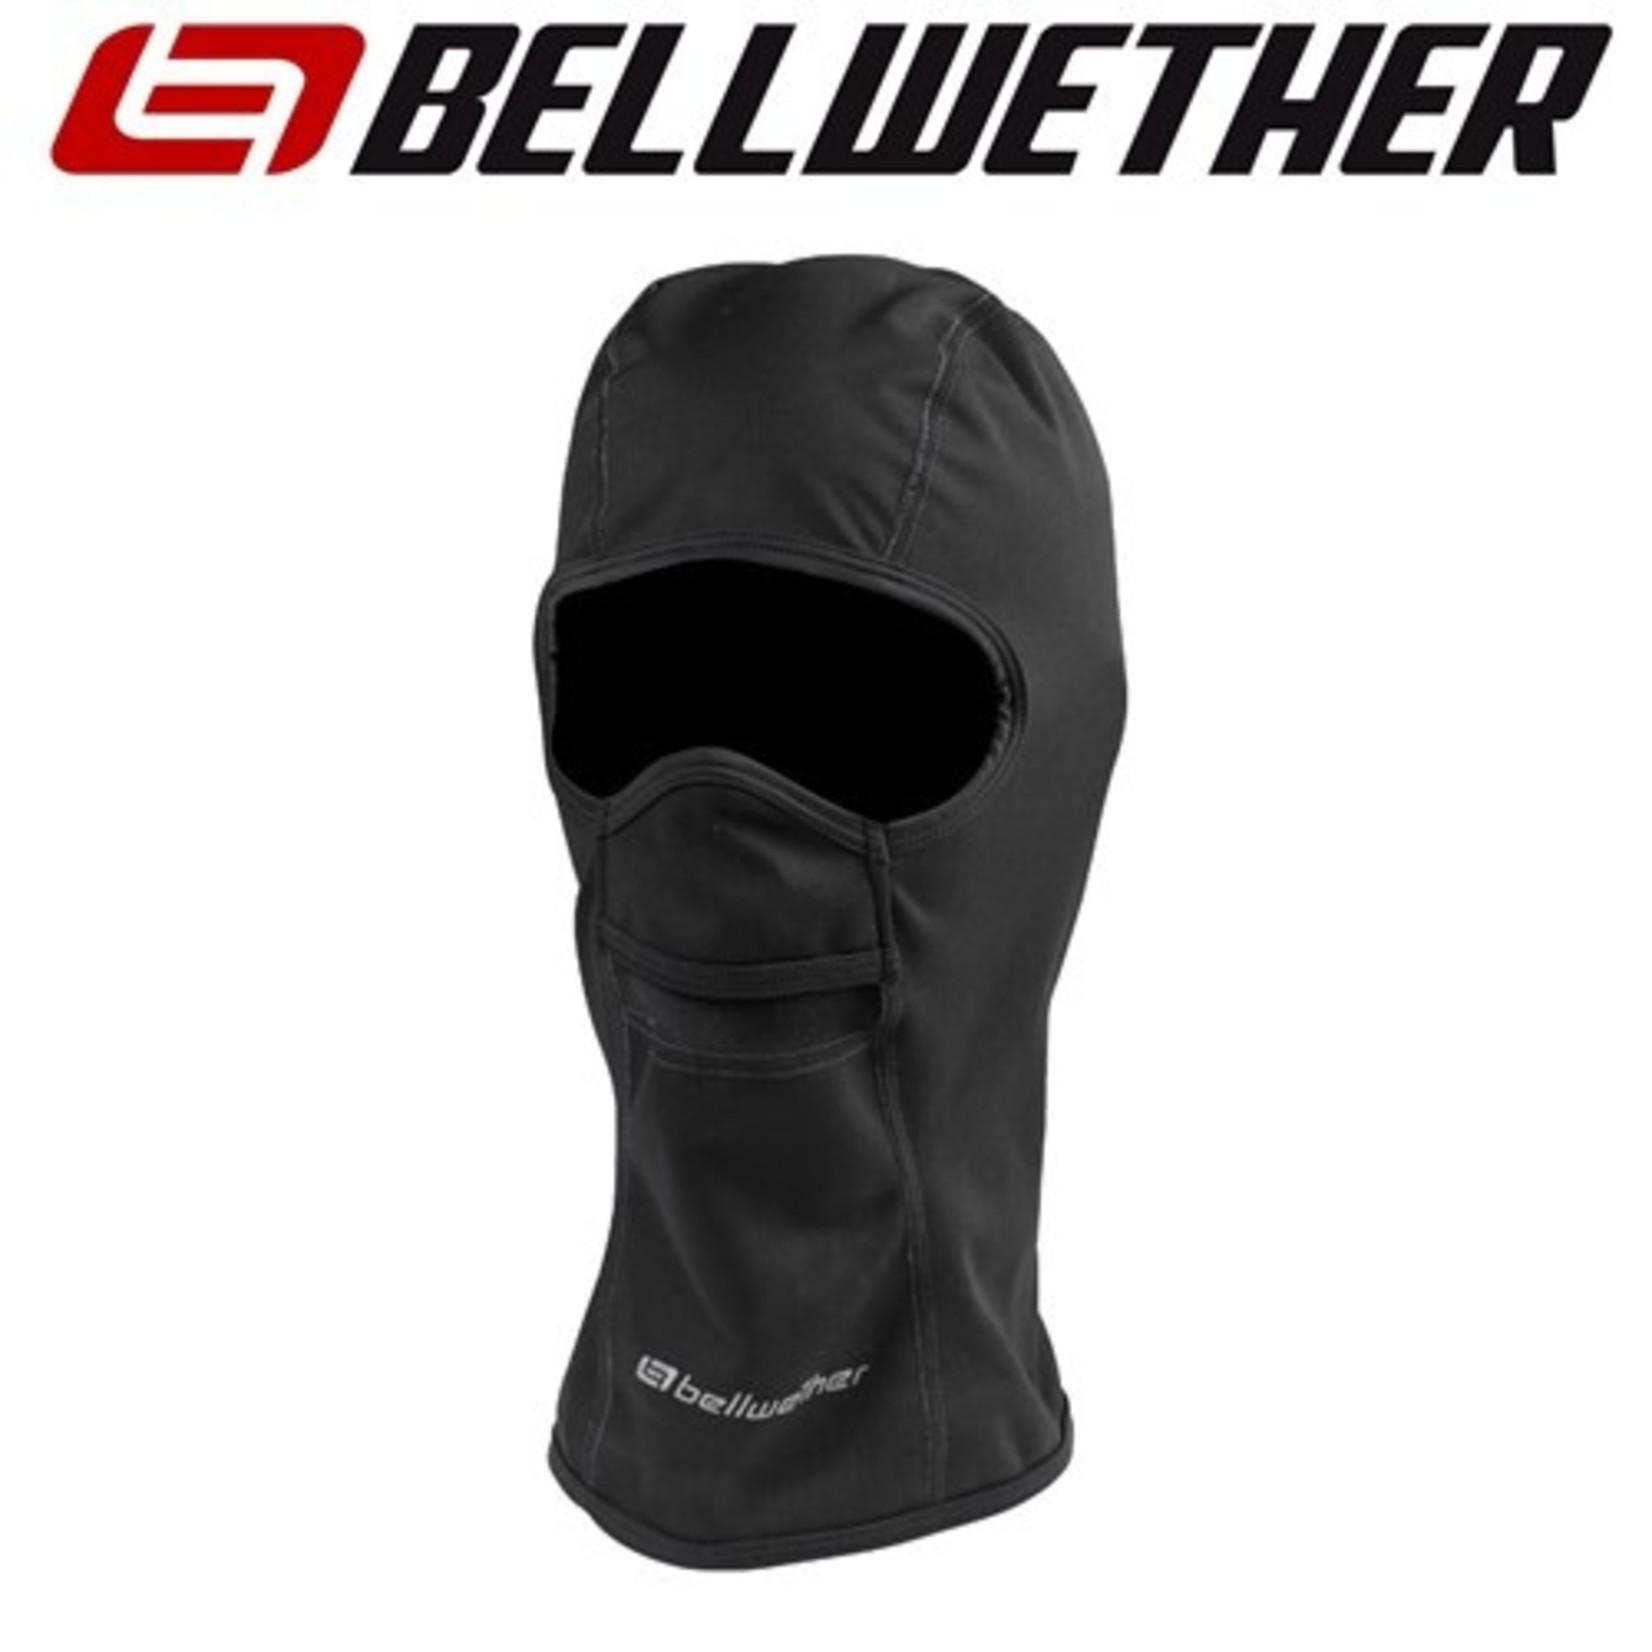 Bellwether Bellwether Bike/Cycling Coldfront Balaclava - Large-X-Large